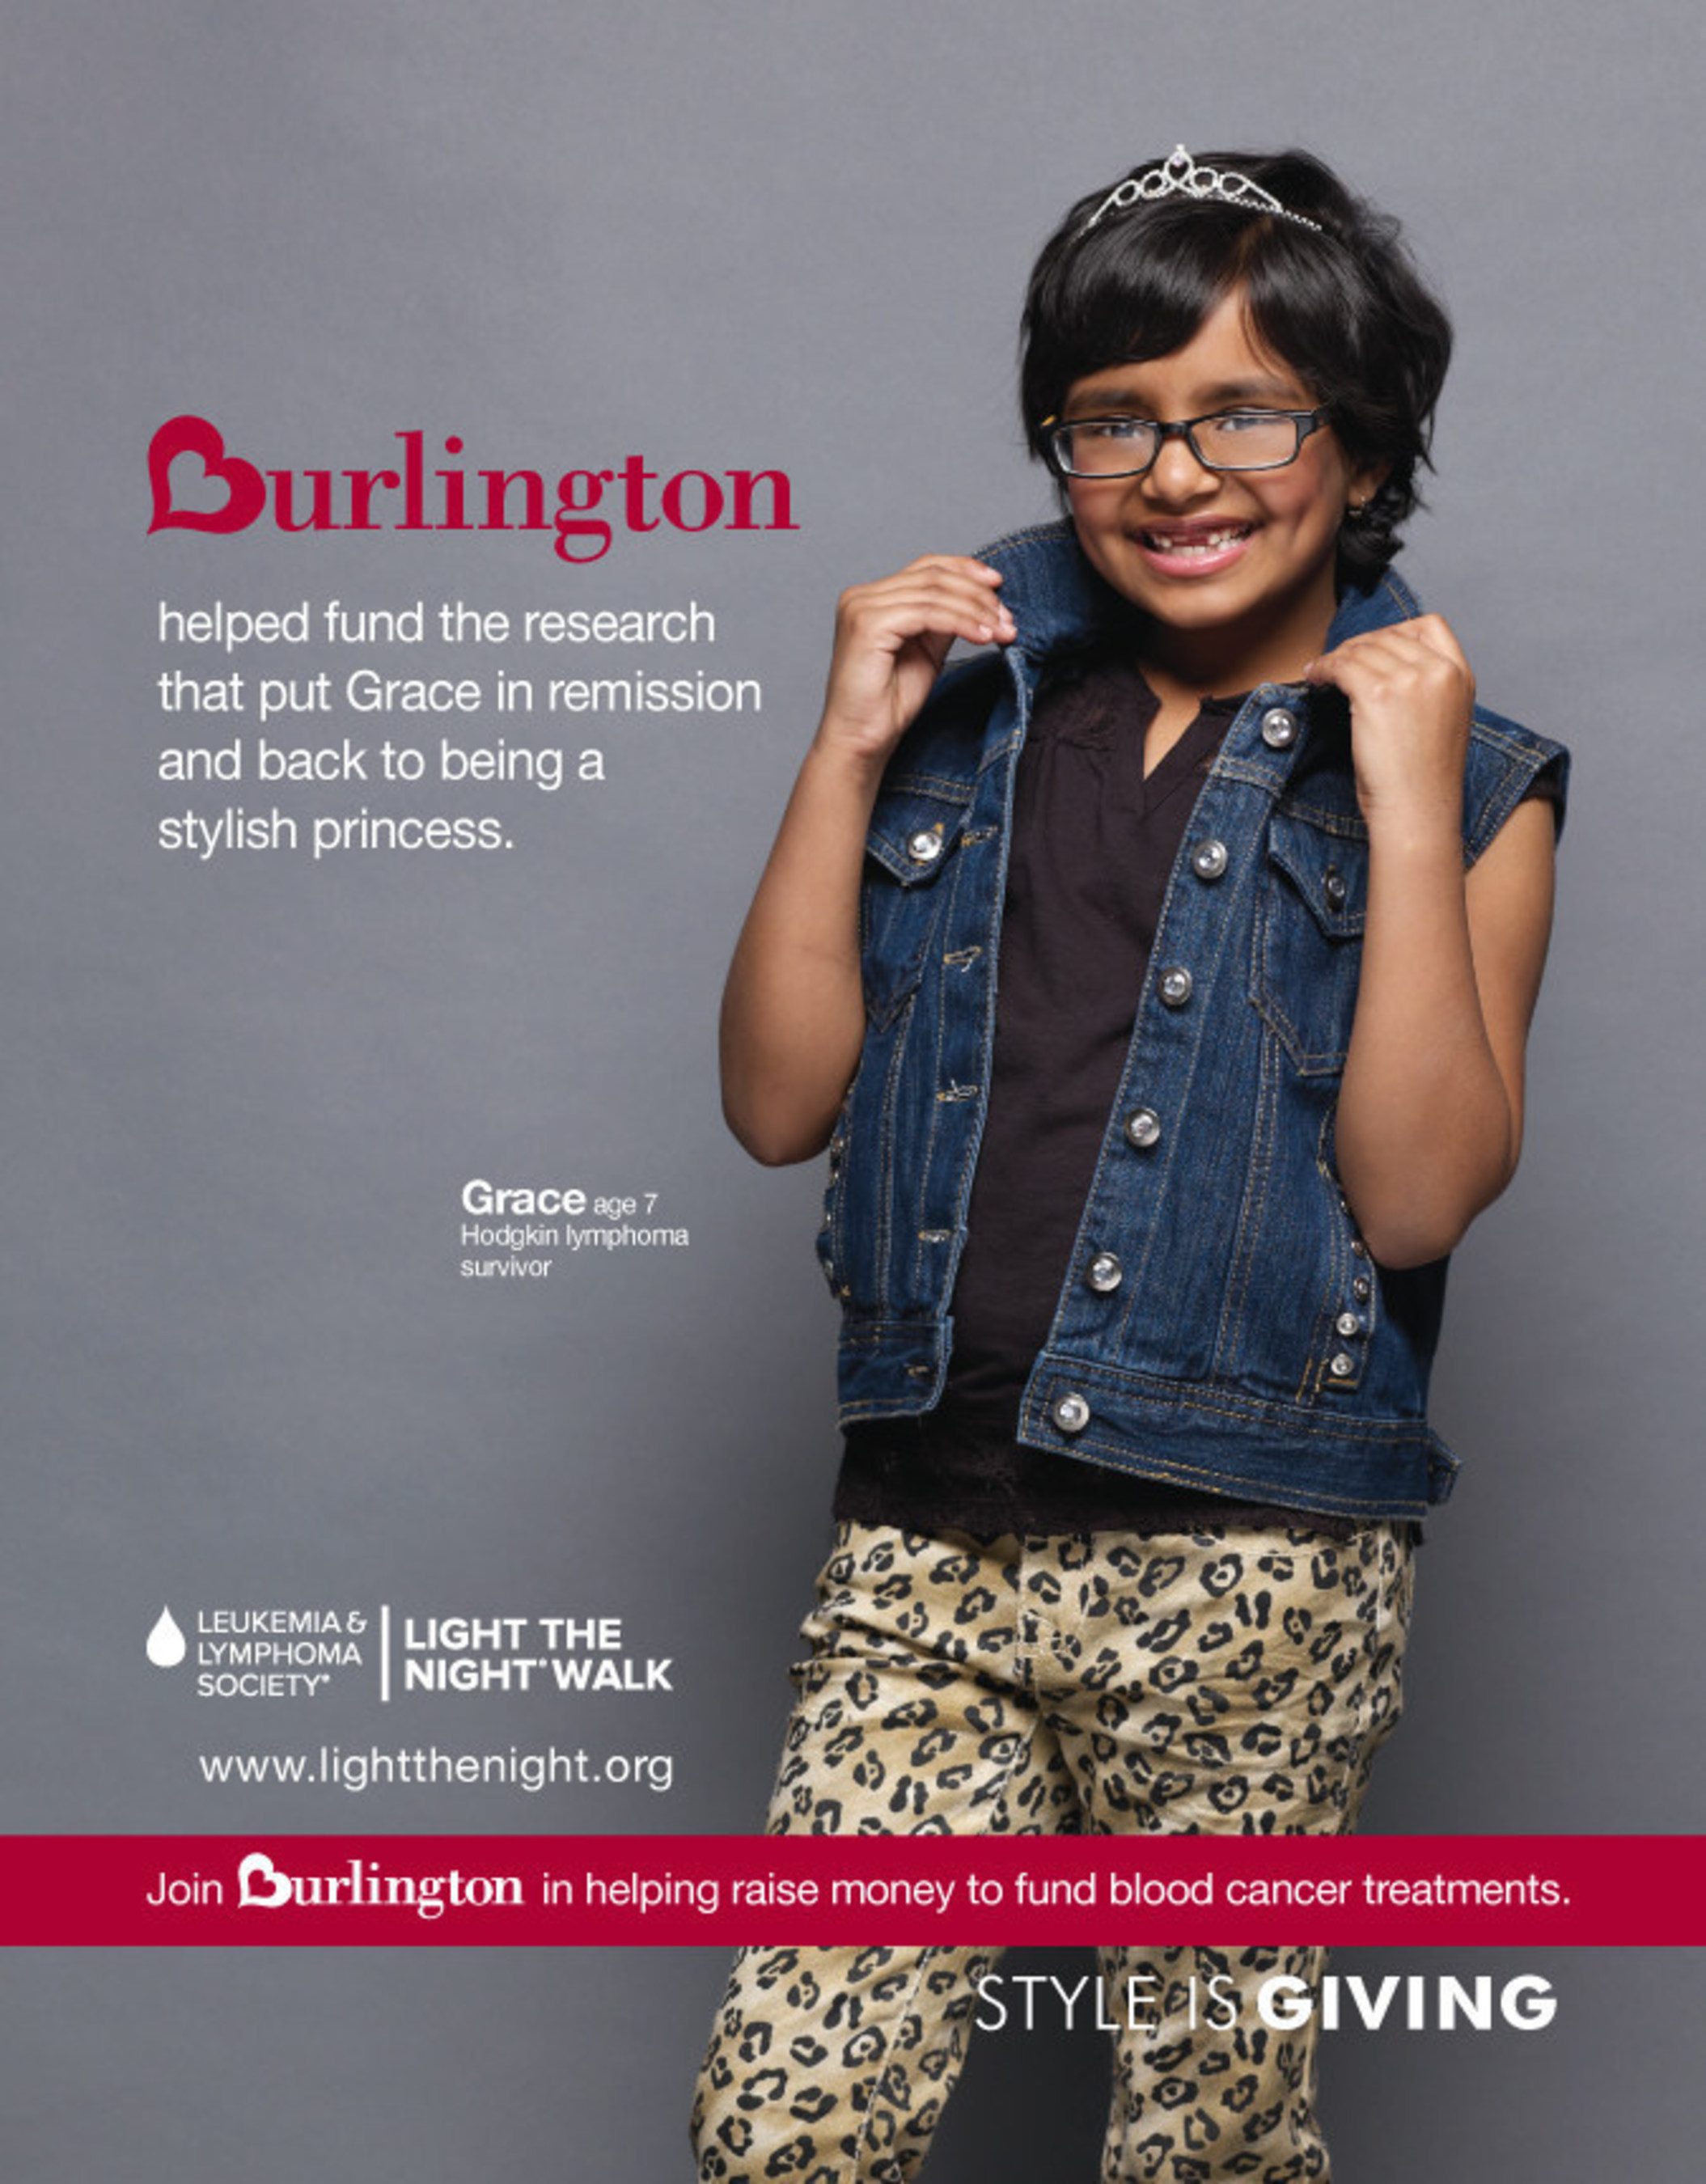 In-store poster featuring Grace, age 7 is a Hodgkin lymphoma survivor.  Burlington helped fund the research that put Grace in remission and back to being a stylish princess. (PRNewsFoto/The Leukemia & Lymphoma Society)